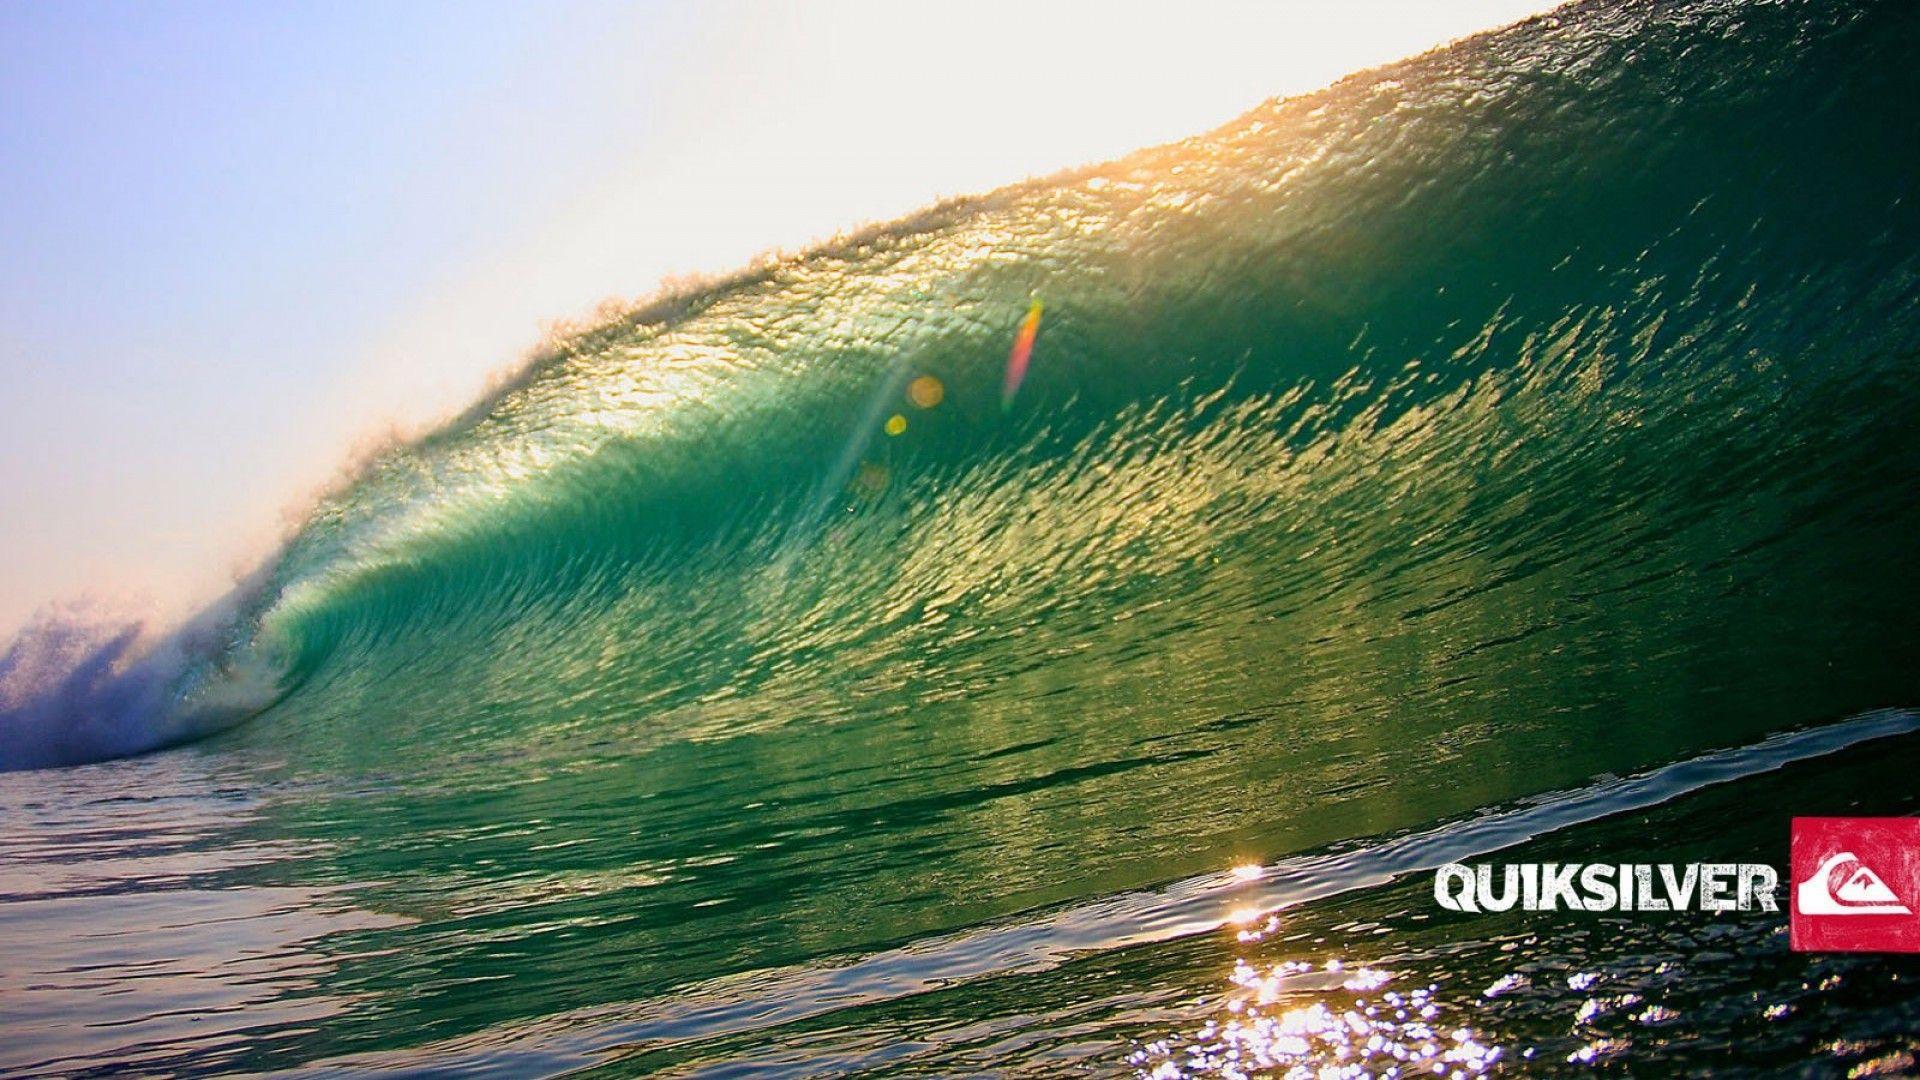 Superb HD Quality Wallpaper's Collection: Quiksilver Wallpapers